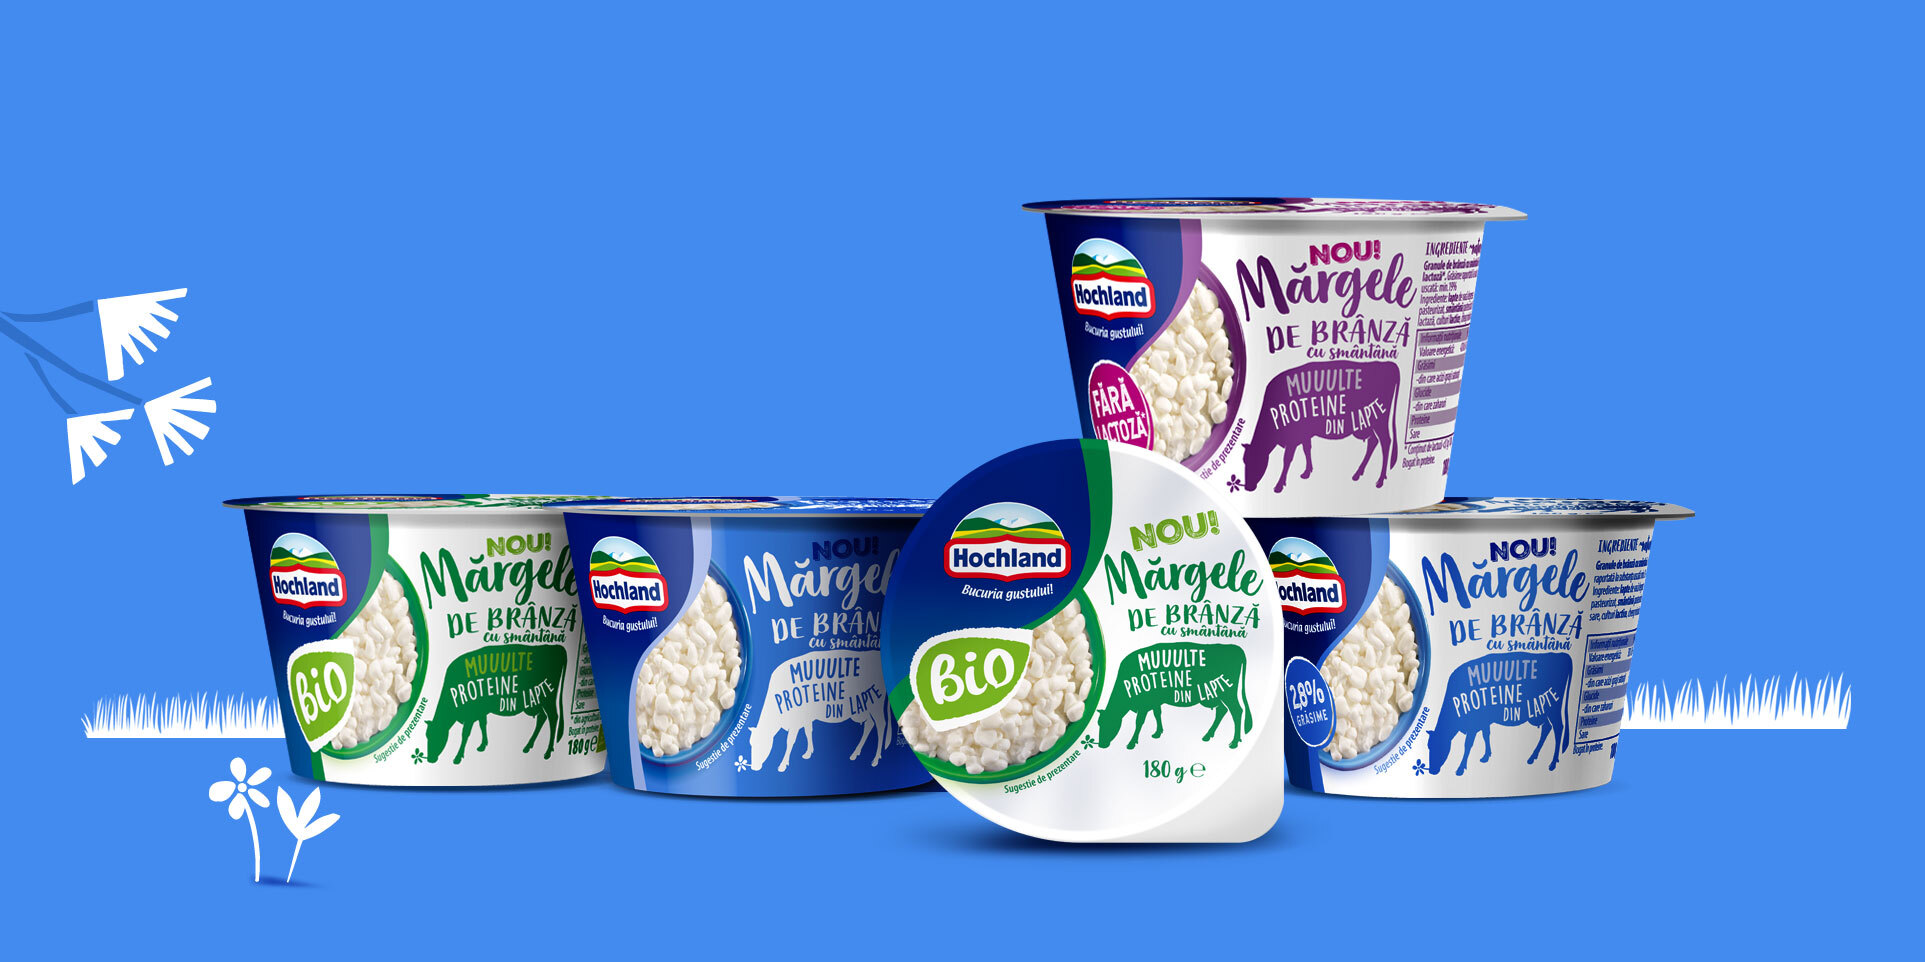 Cottage cheese packaging design for Hochland Margele de Branza line on a blue background.